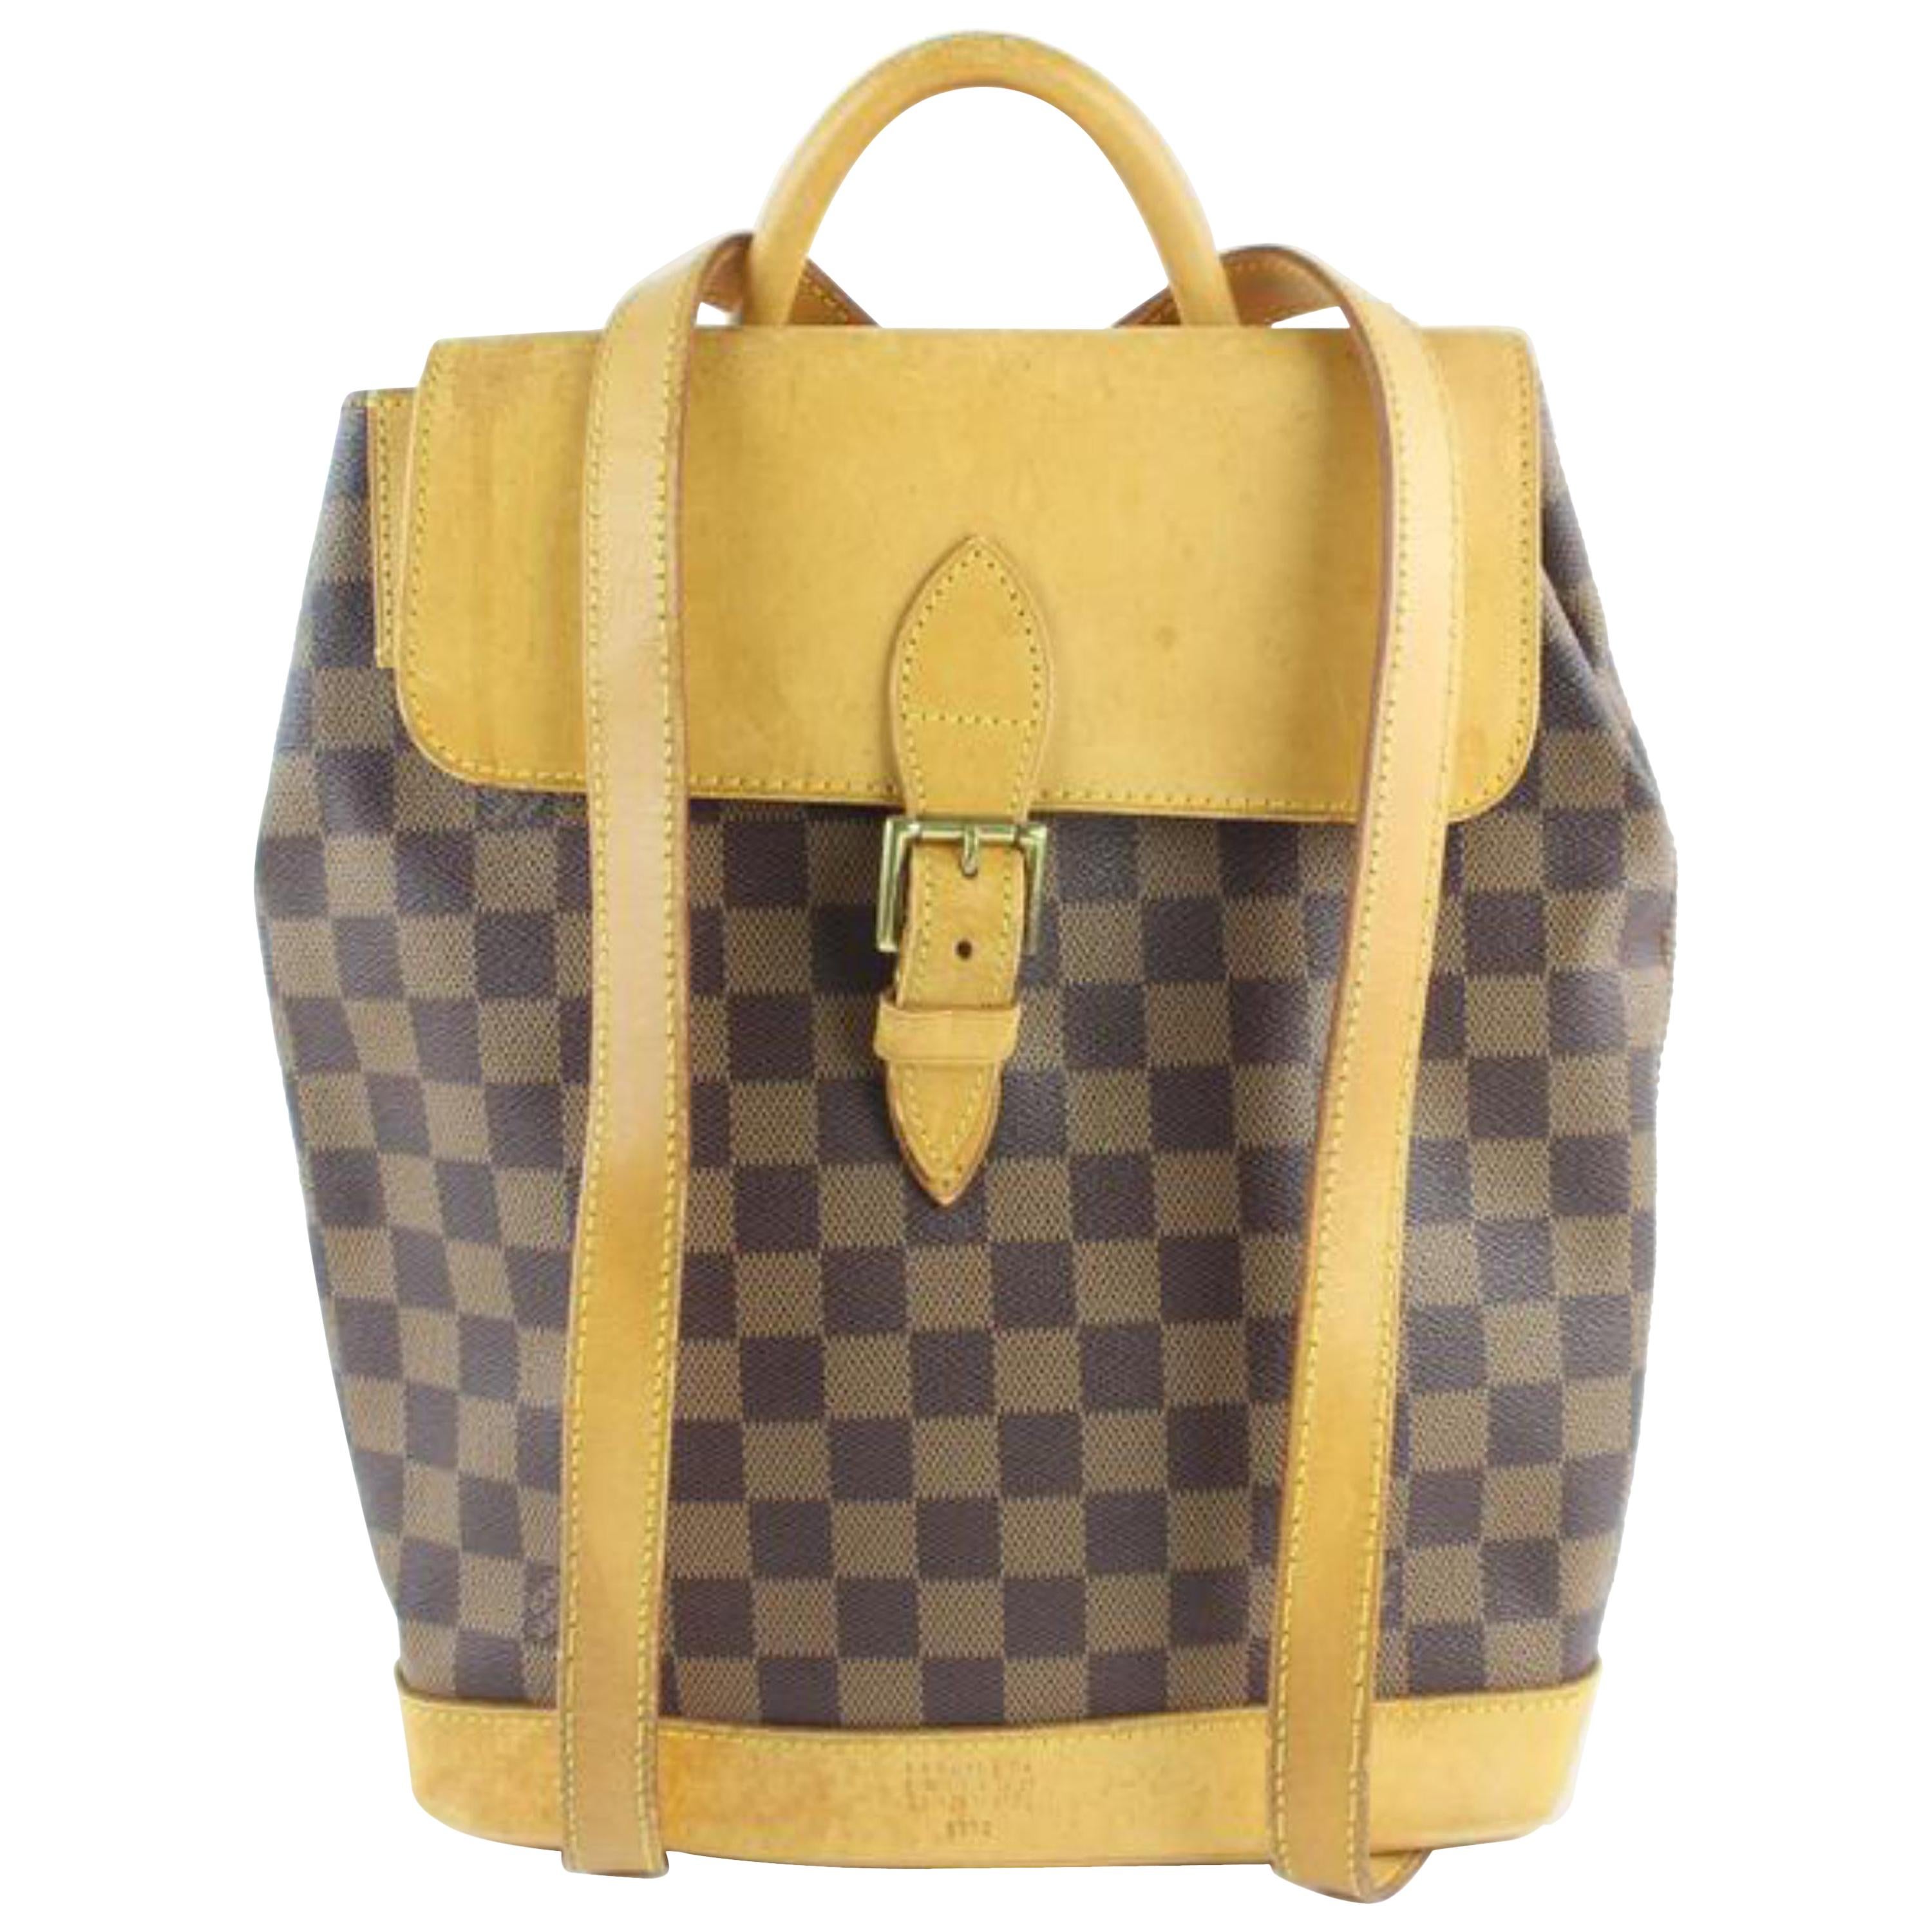 Louis Vuitton 2003 Brown Damier Ebene Soho Backpack For Sale at